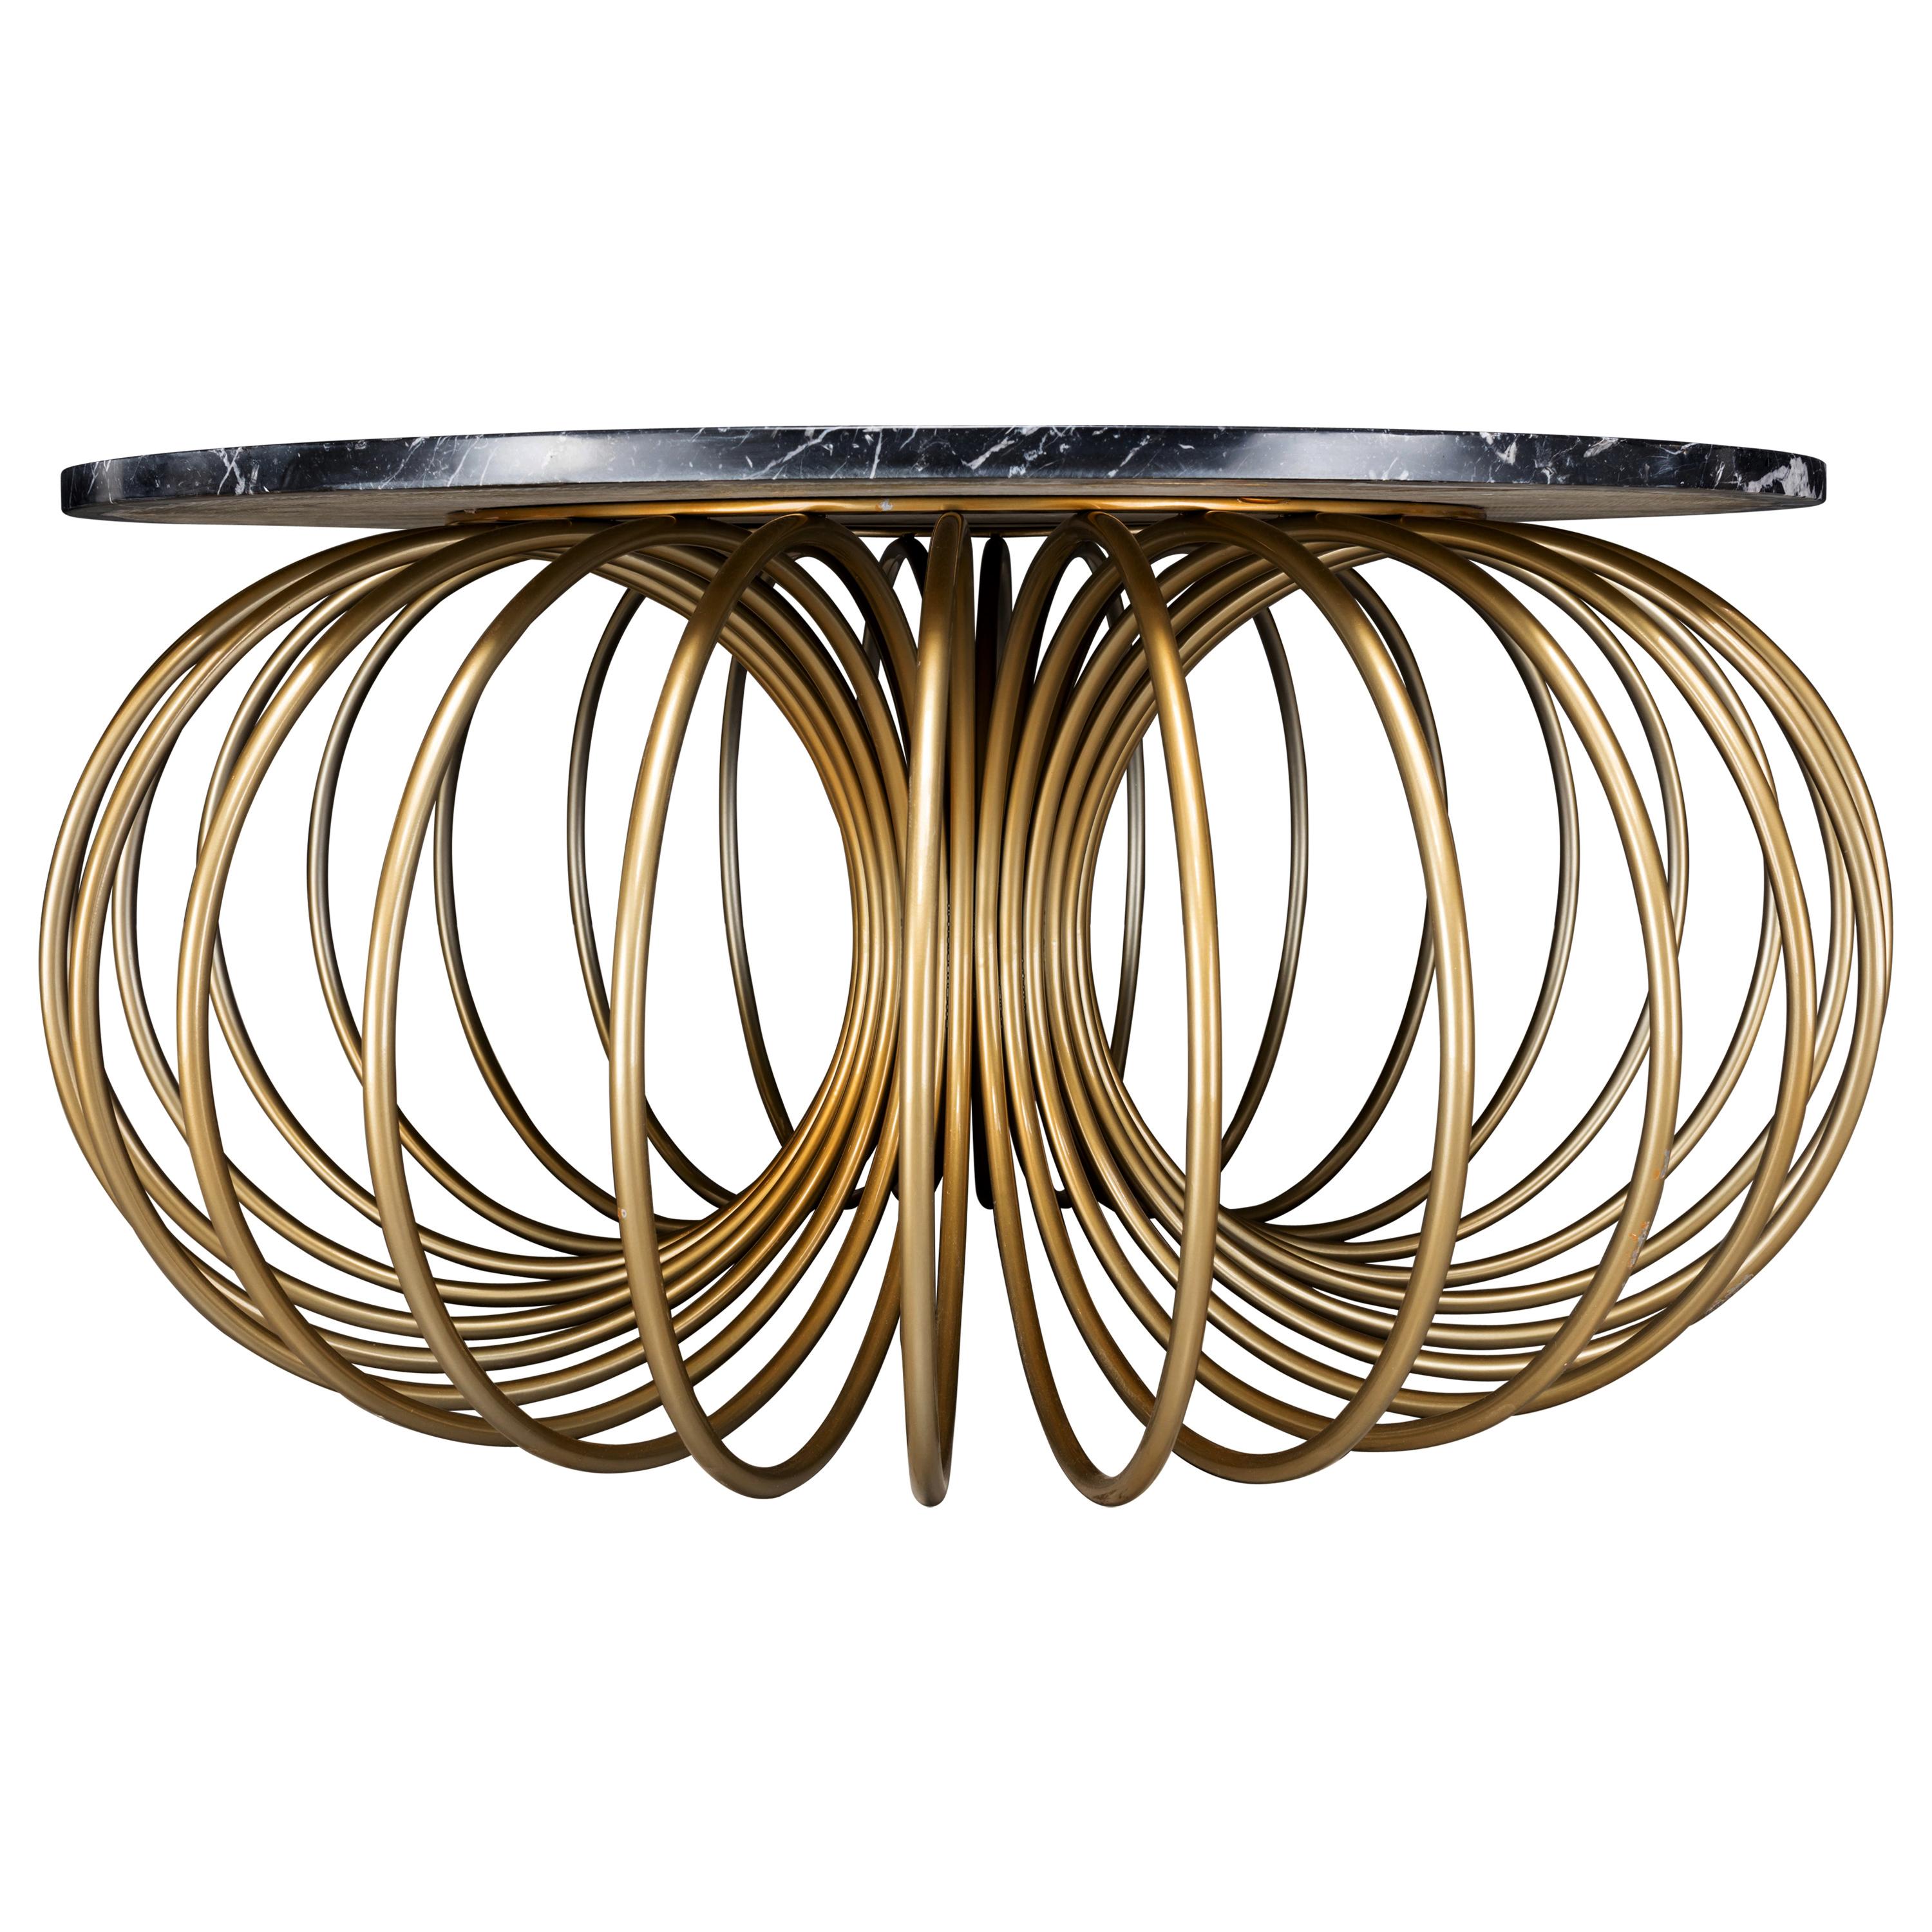 SLINK COFFEE TABLE - Nero Marquina Marble and Gold Powder Coated Metal For Sale